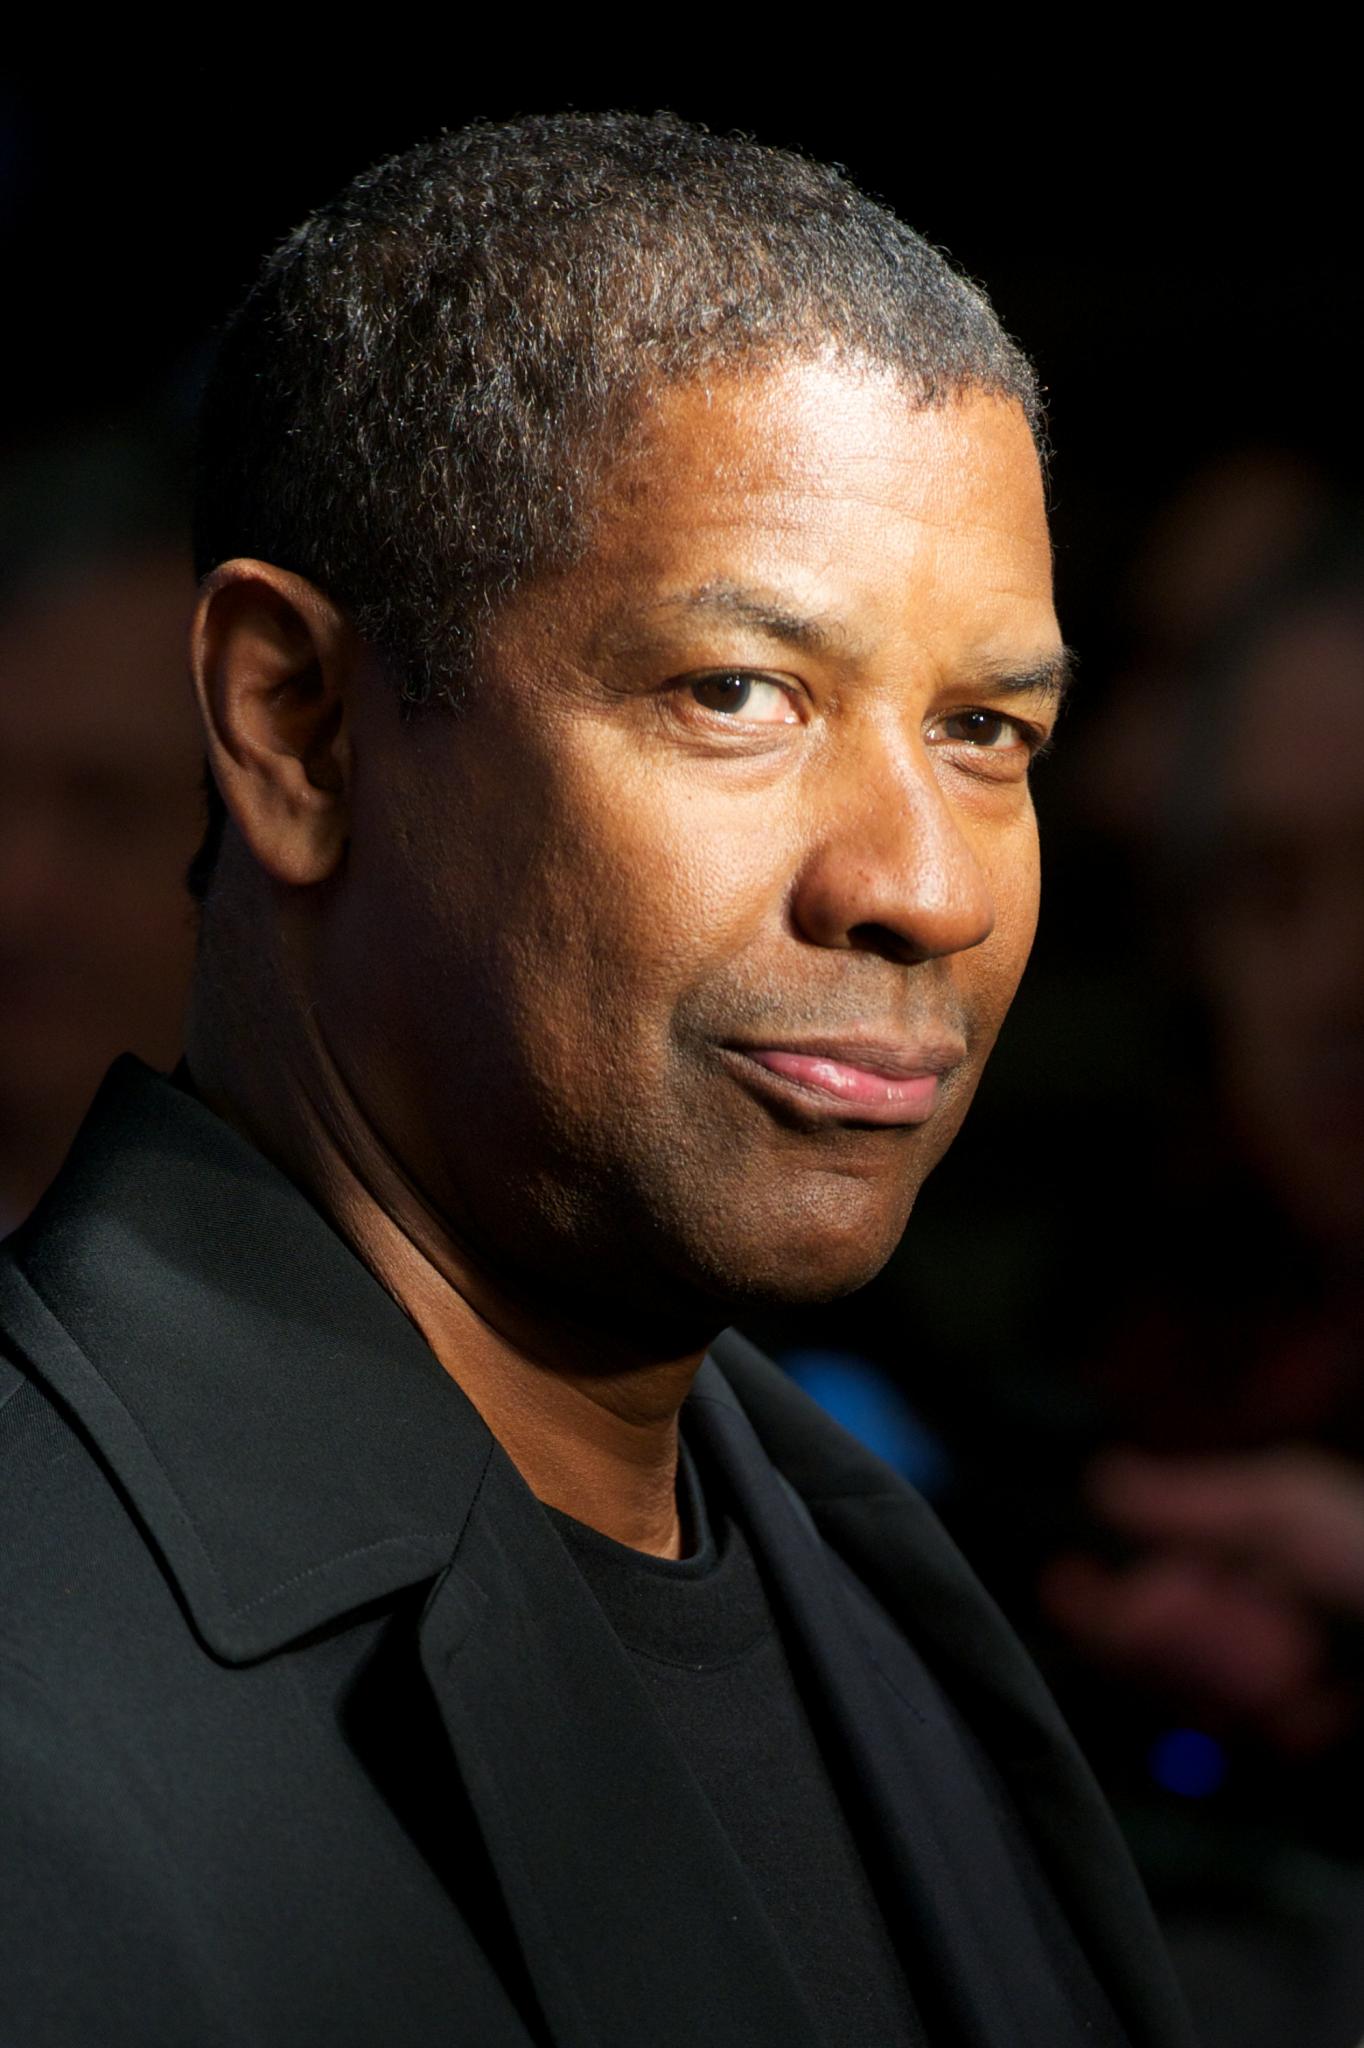 Denzel Washington Dramatically Reading Greeting Cards Is The Only Thing You Need To See Today
